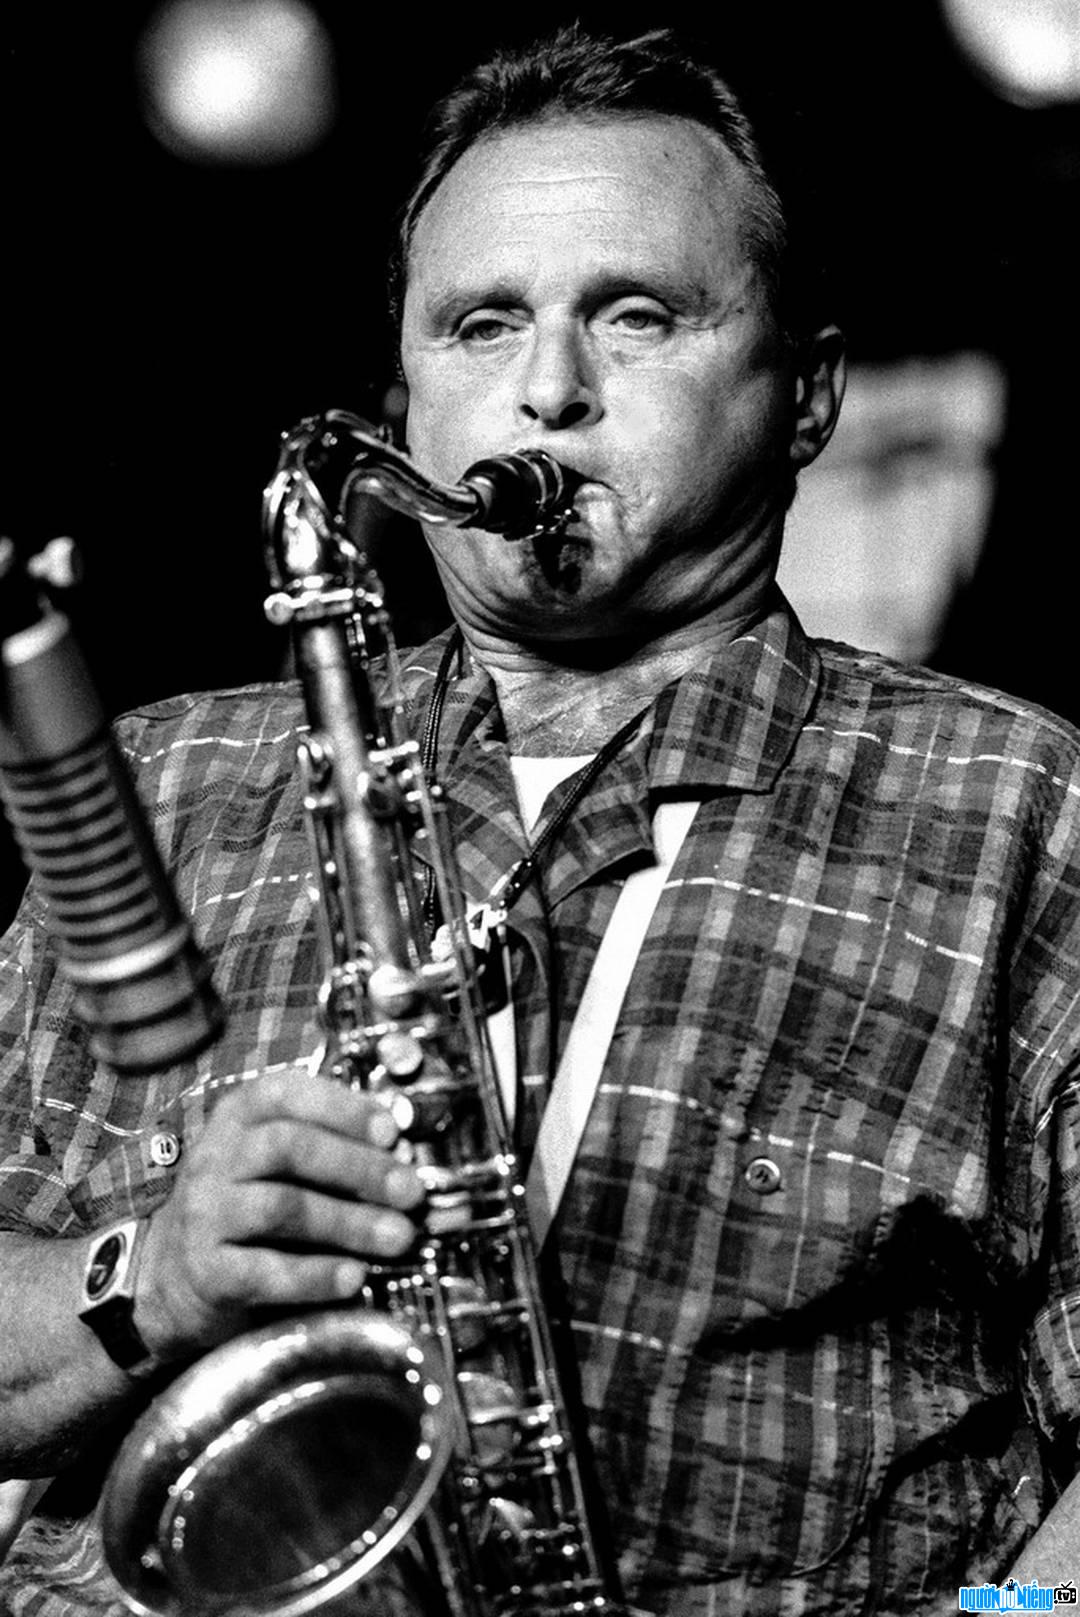 Stan Getz - one of the greatest tenor saxophonists of all time